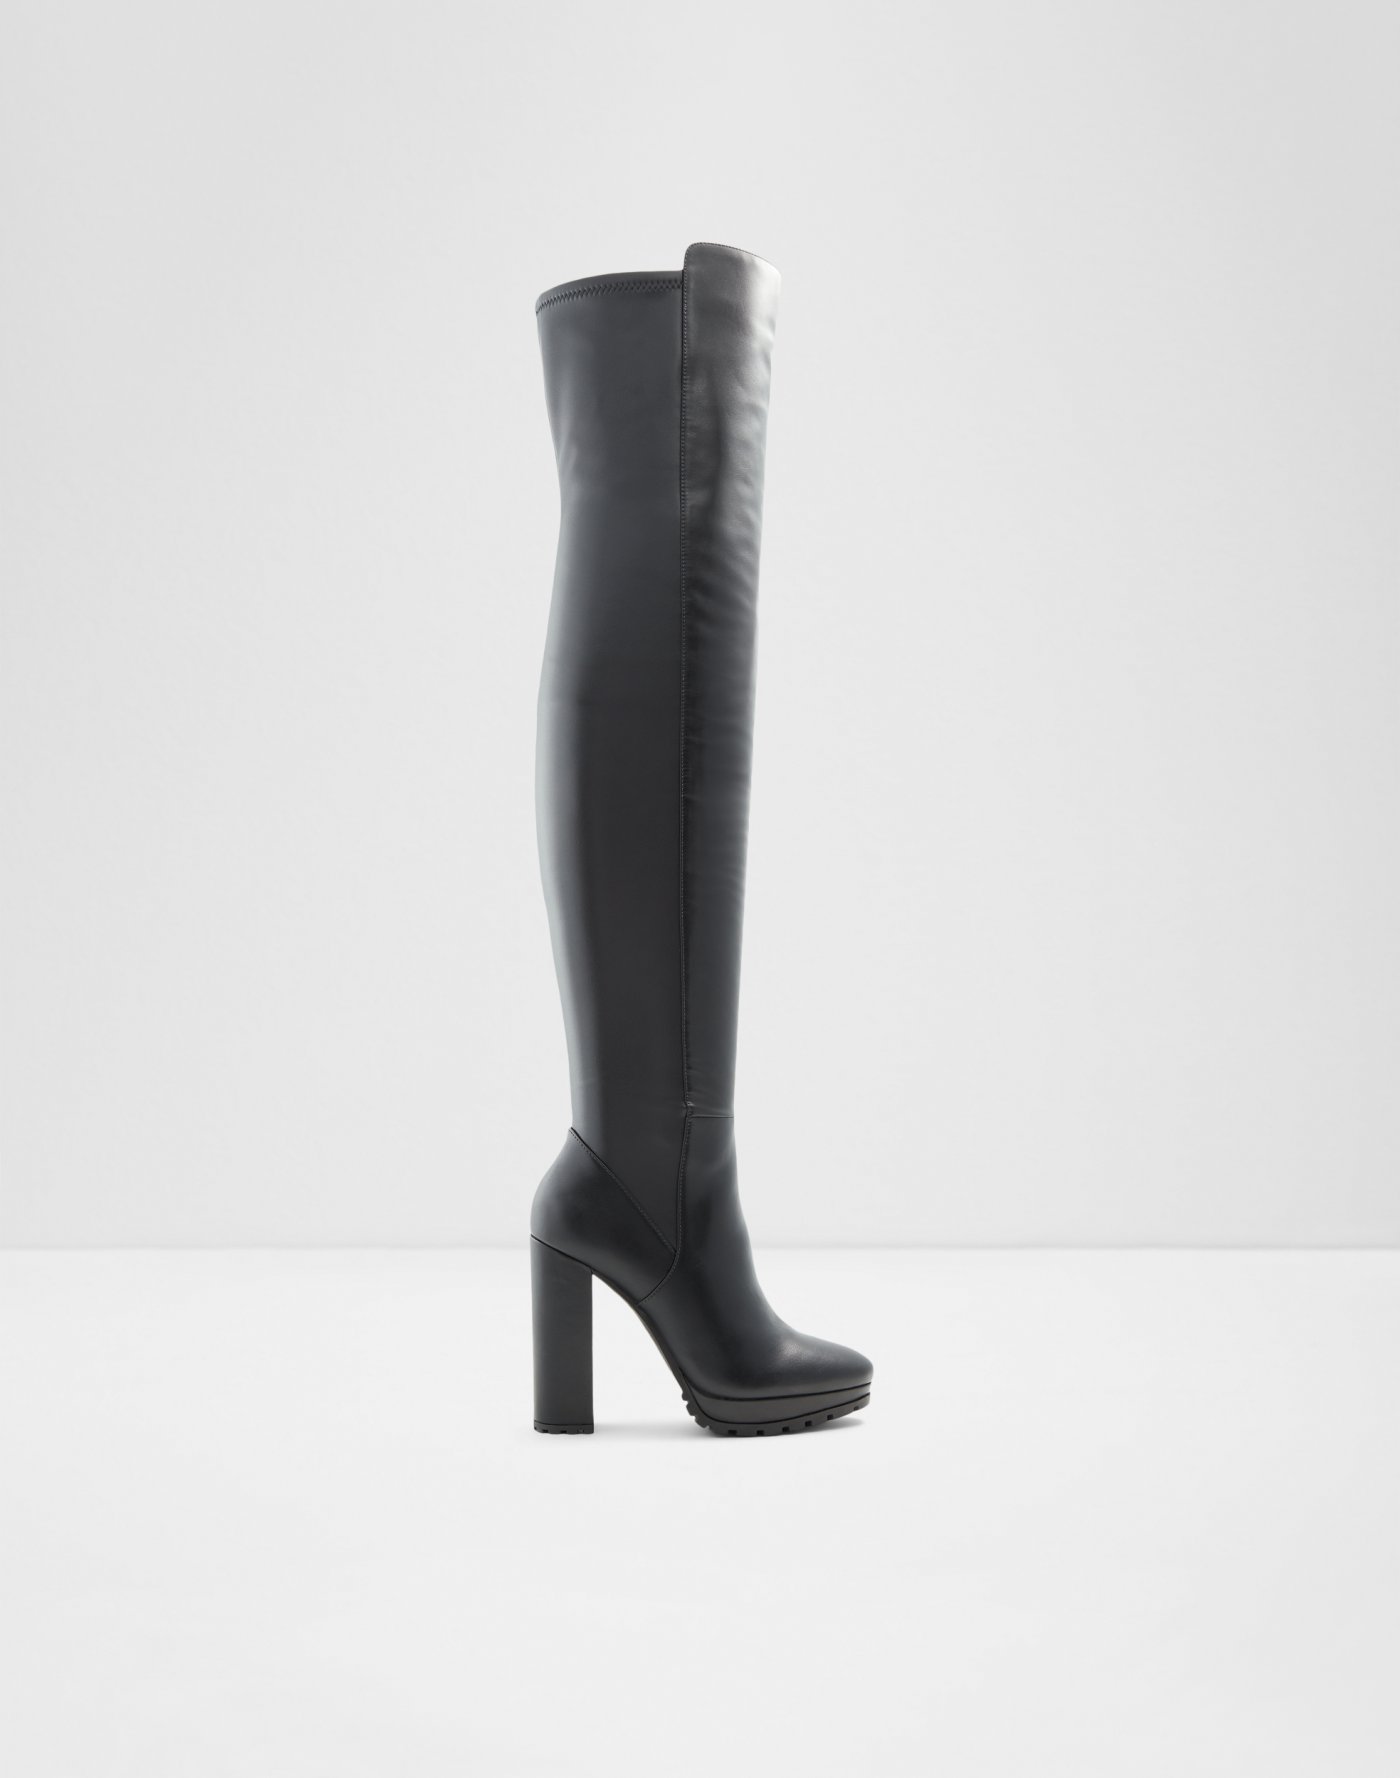 stuart weitzman boots russell and bromley